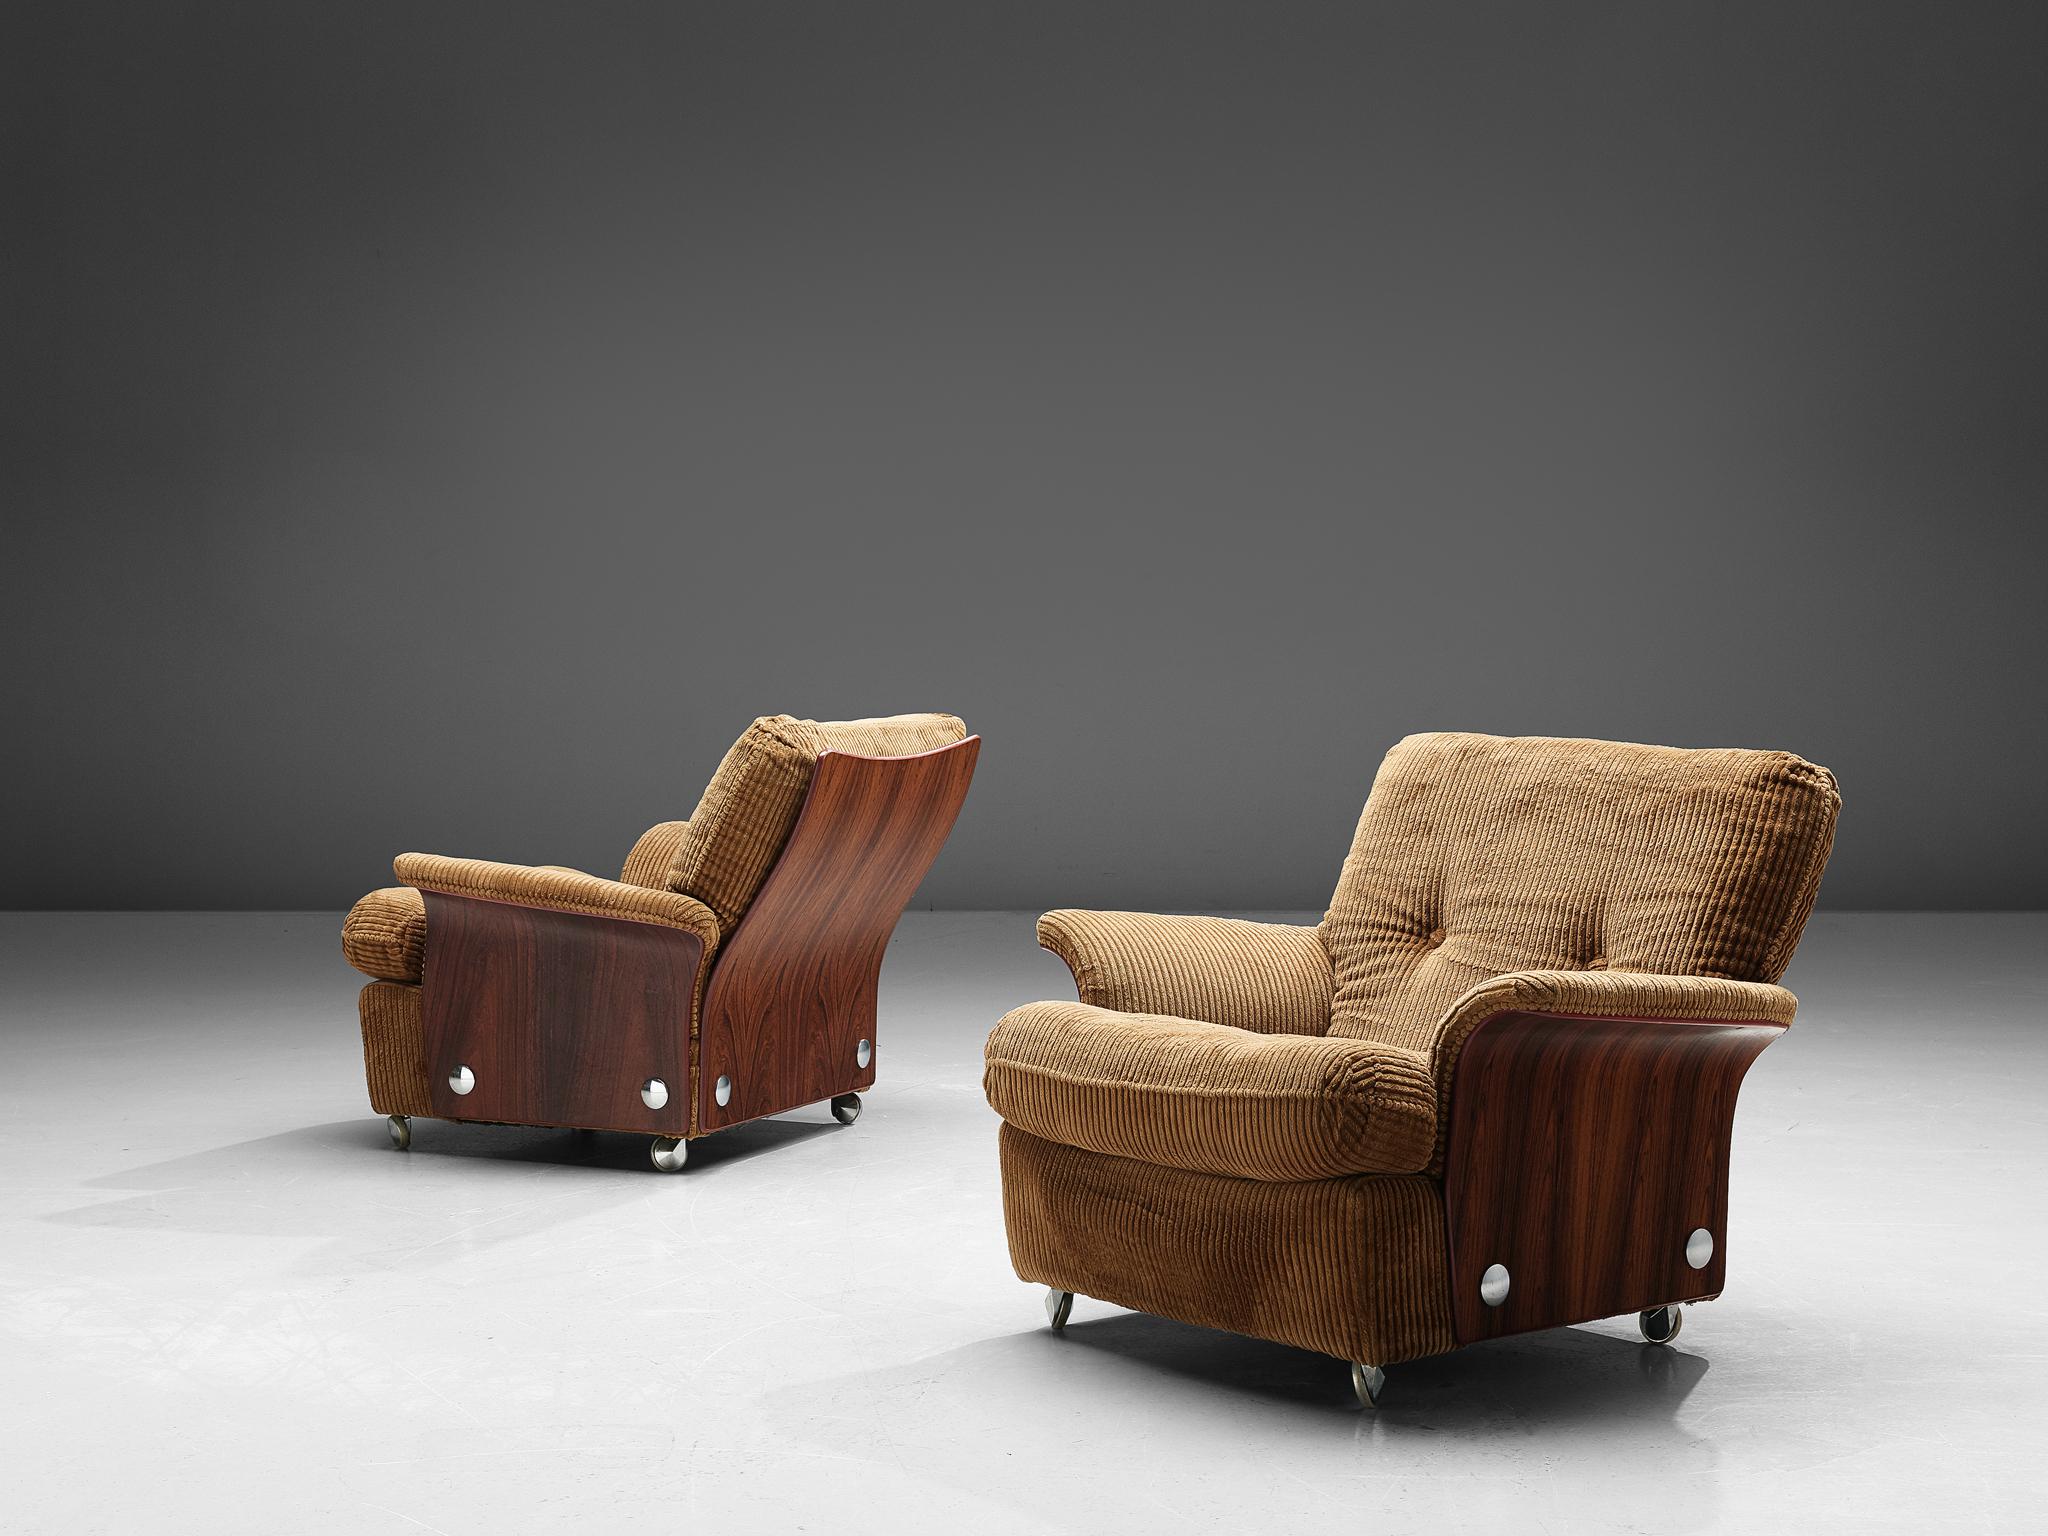 Pair of easy chairs, corduroy upholstery, rosewood, Europe, 1950s.

VAT within the EU:
When buying or delivering an item within the EU, VAT usually applies and will be added.